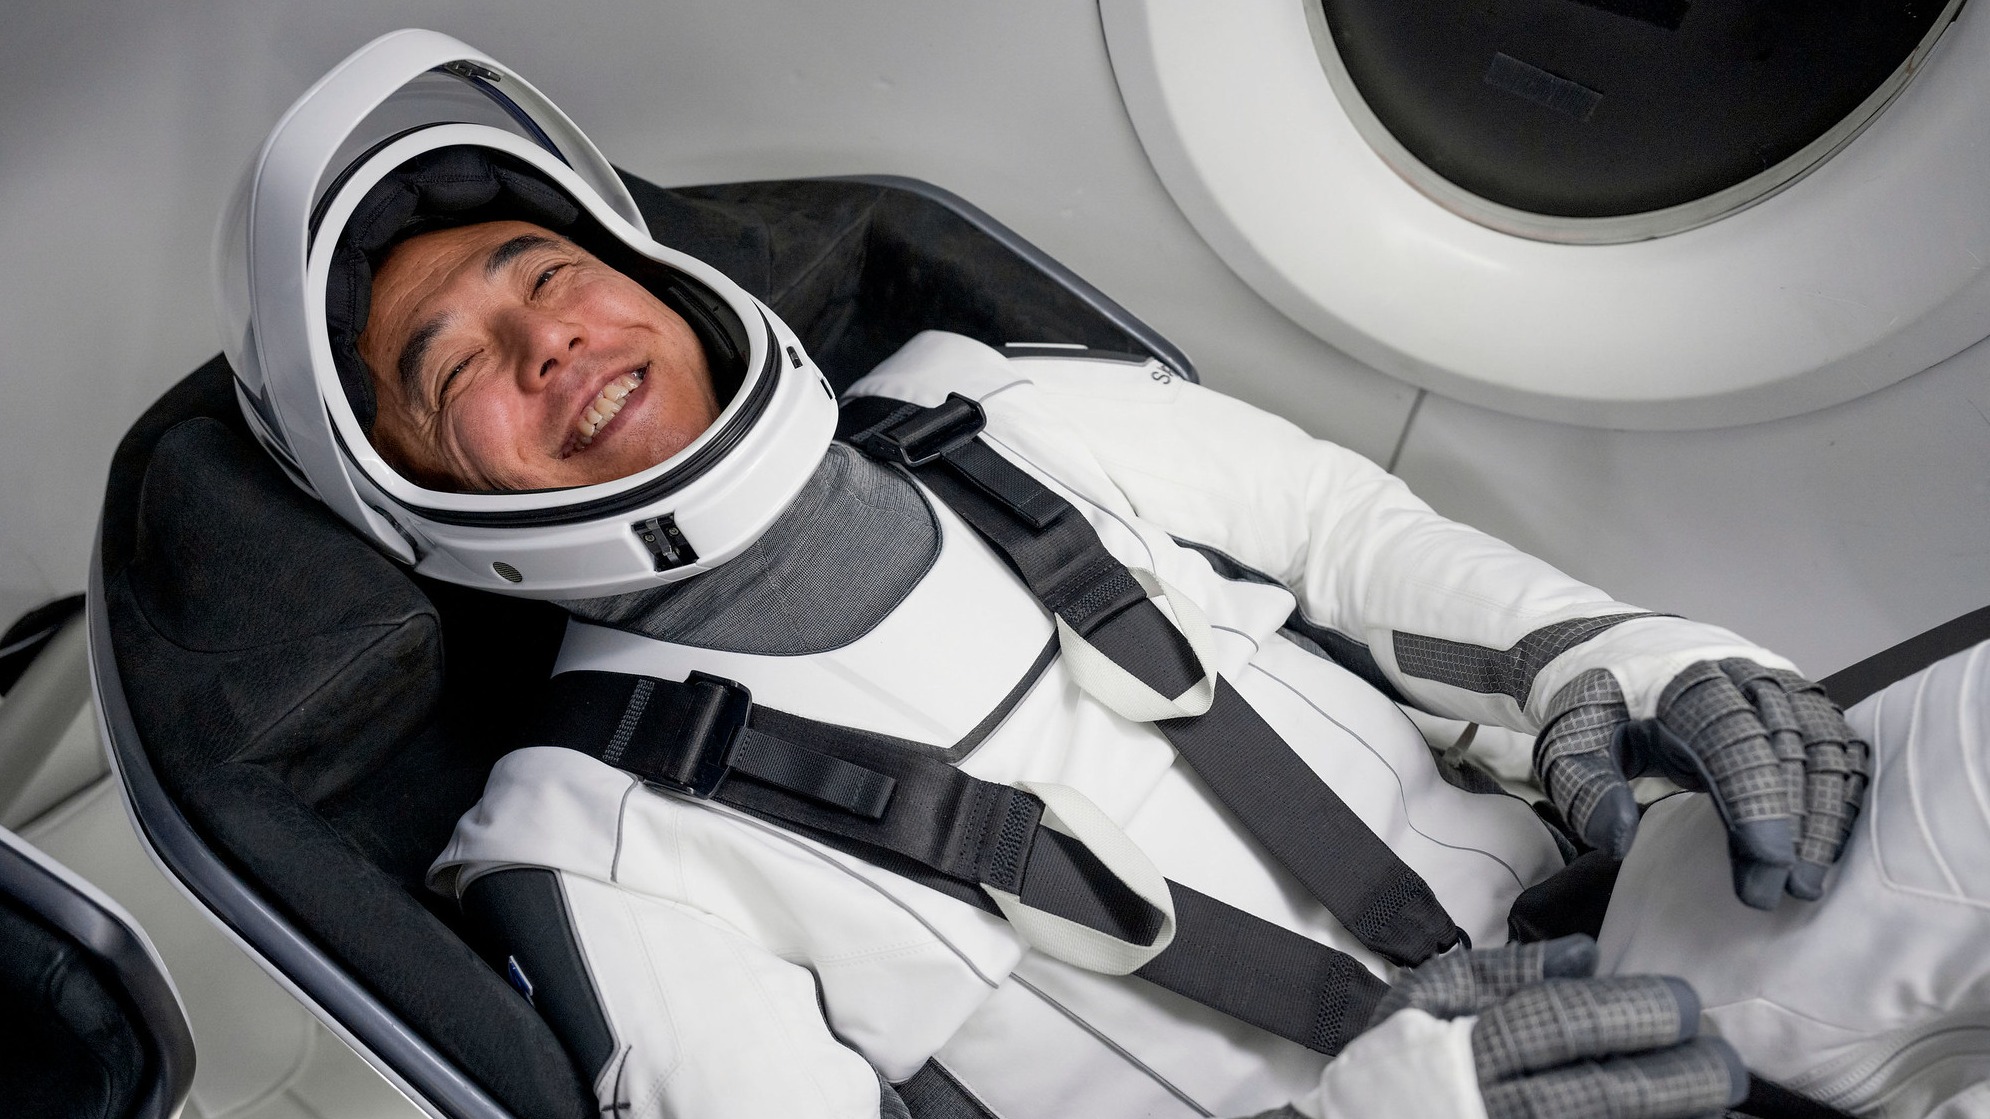 satoshi furukawa lying back in a spacesuit on a spacecraft seat and smiling. a circular window is partially visible at upper right